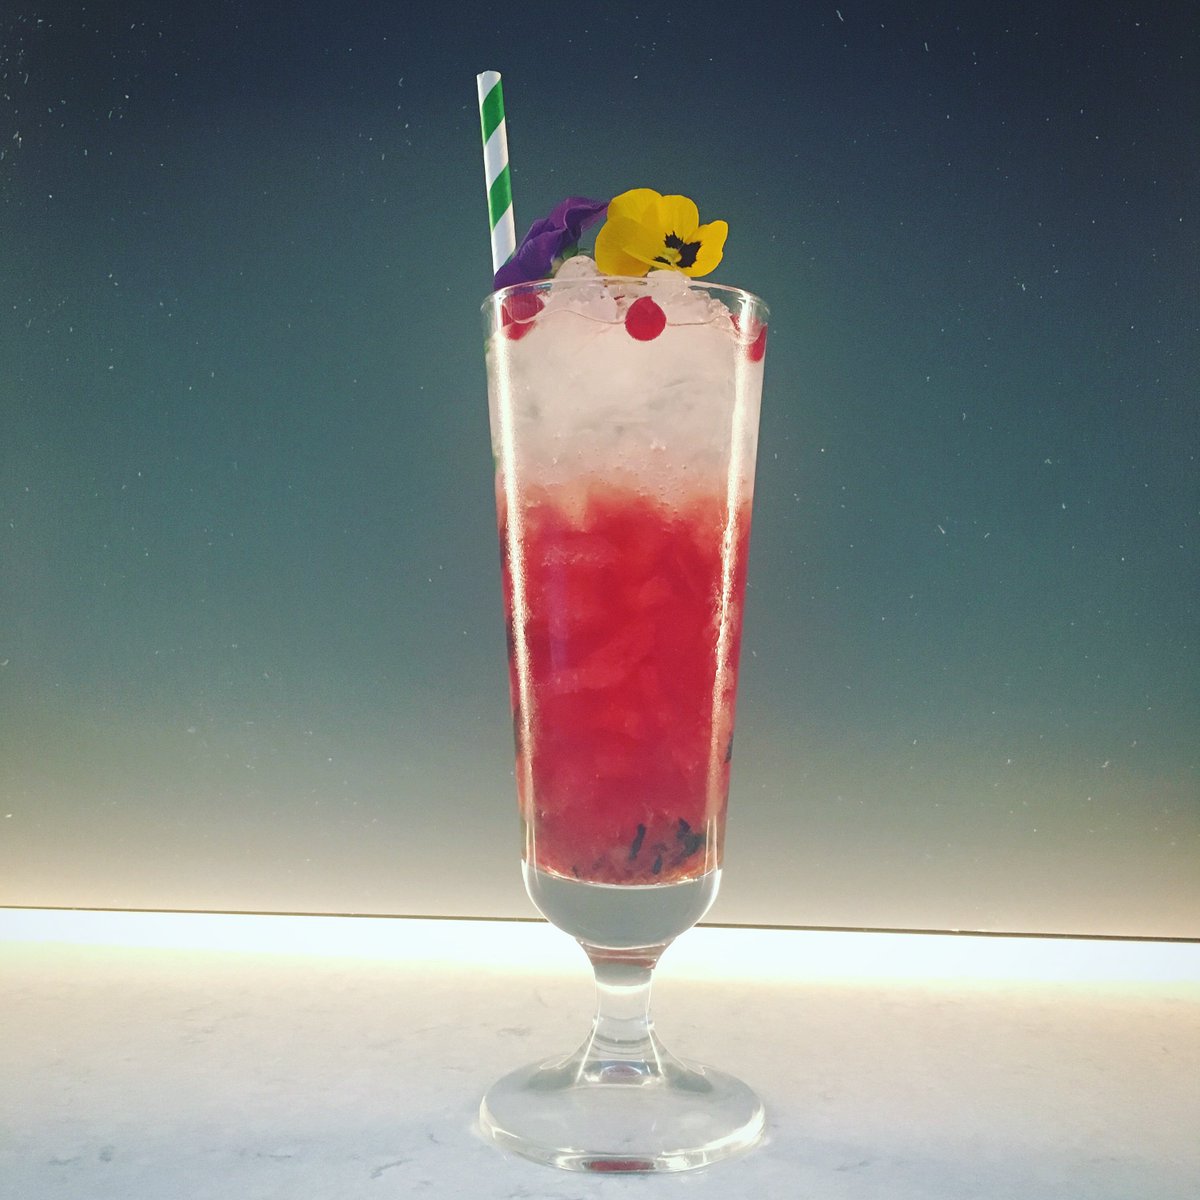 Have you tried our Ding-a-Ling cocktail yet? Made with lingonberry coulis, rooibos & cream strawberries syrup, topped with lemonade. It's the perfect mid-week treat #BestIrishCocktail #DingleGin